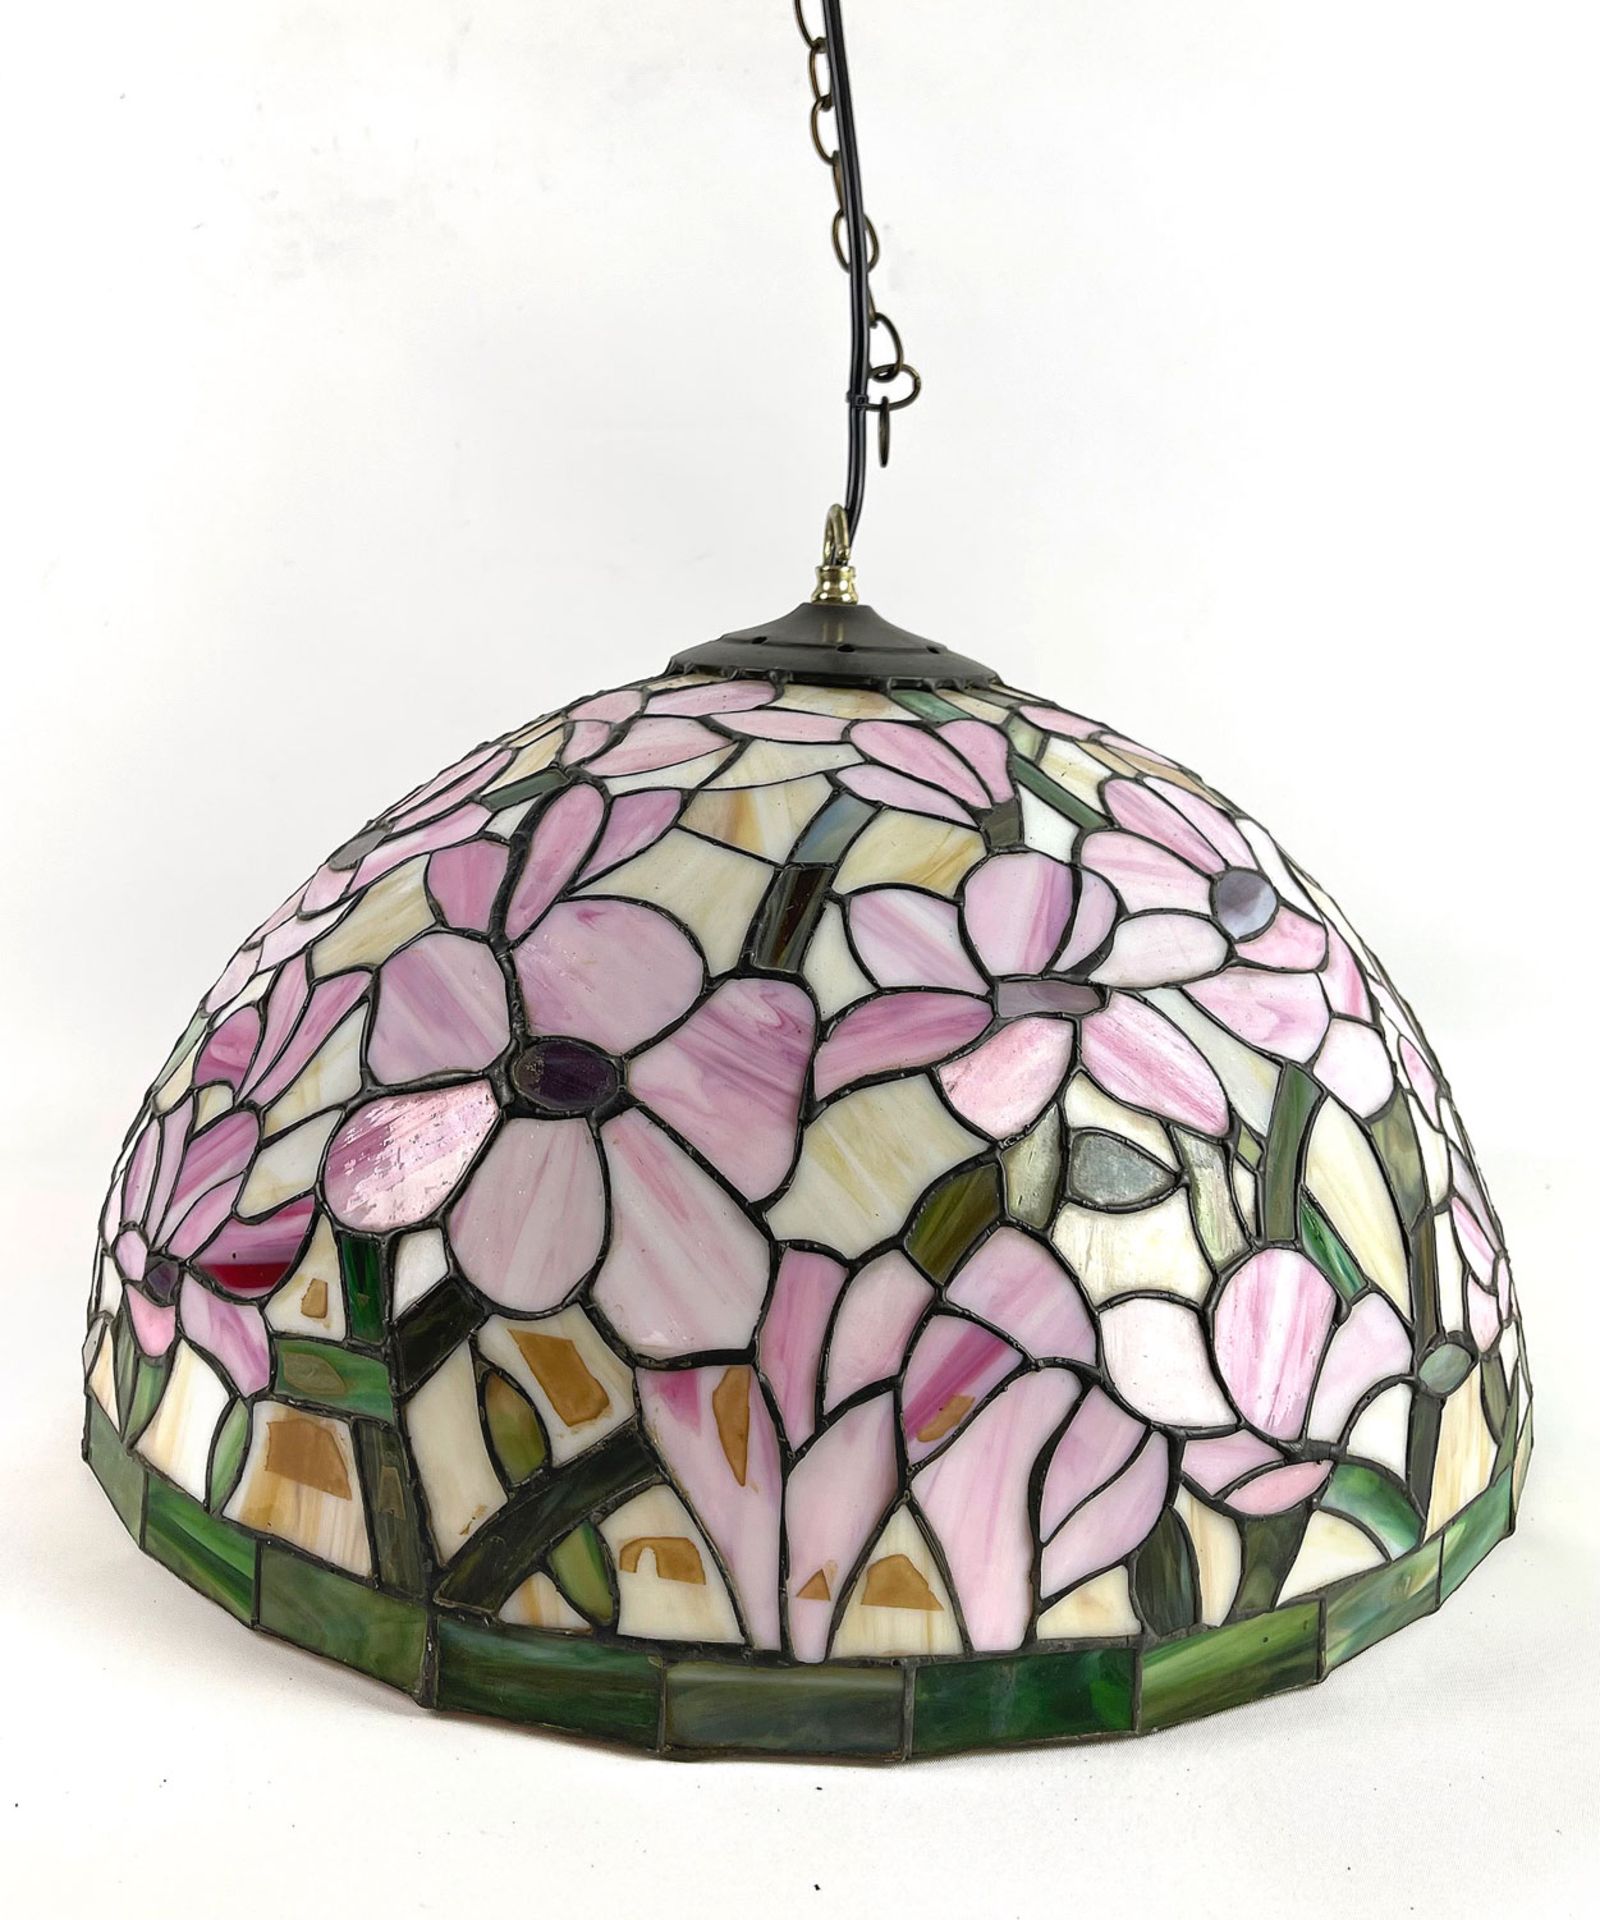 Tiffany Style Hanging Ceiling Lamp with Flower Motif